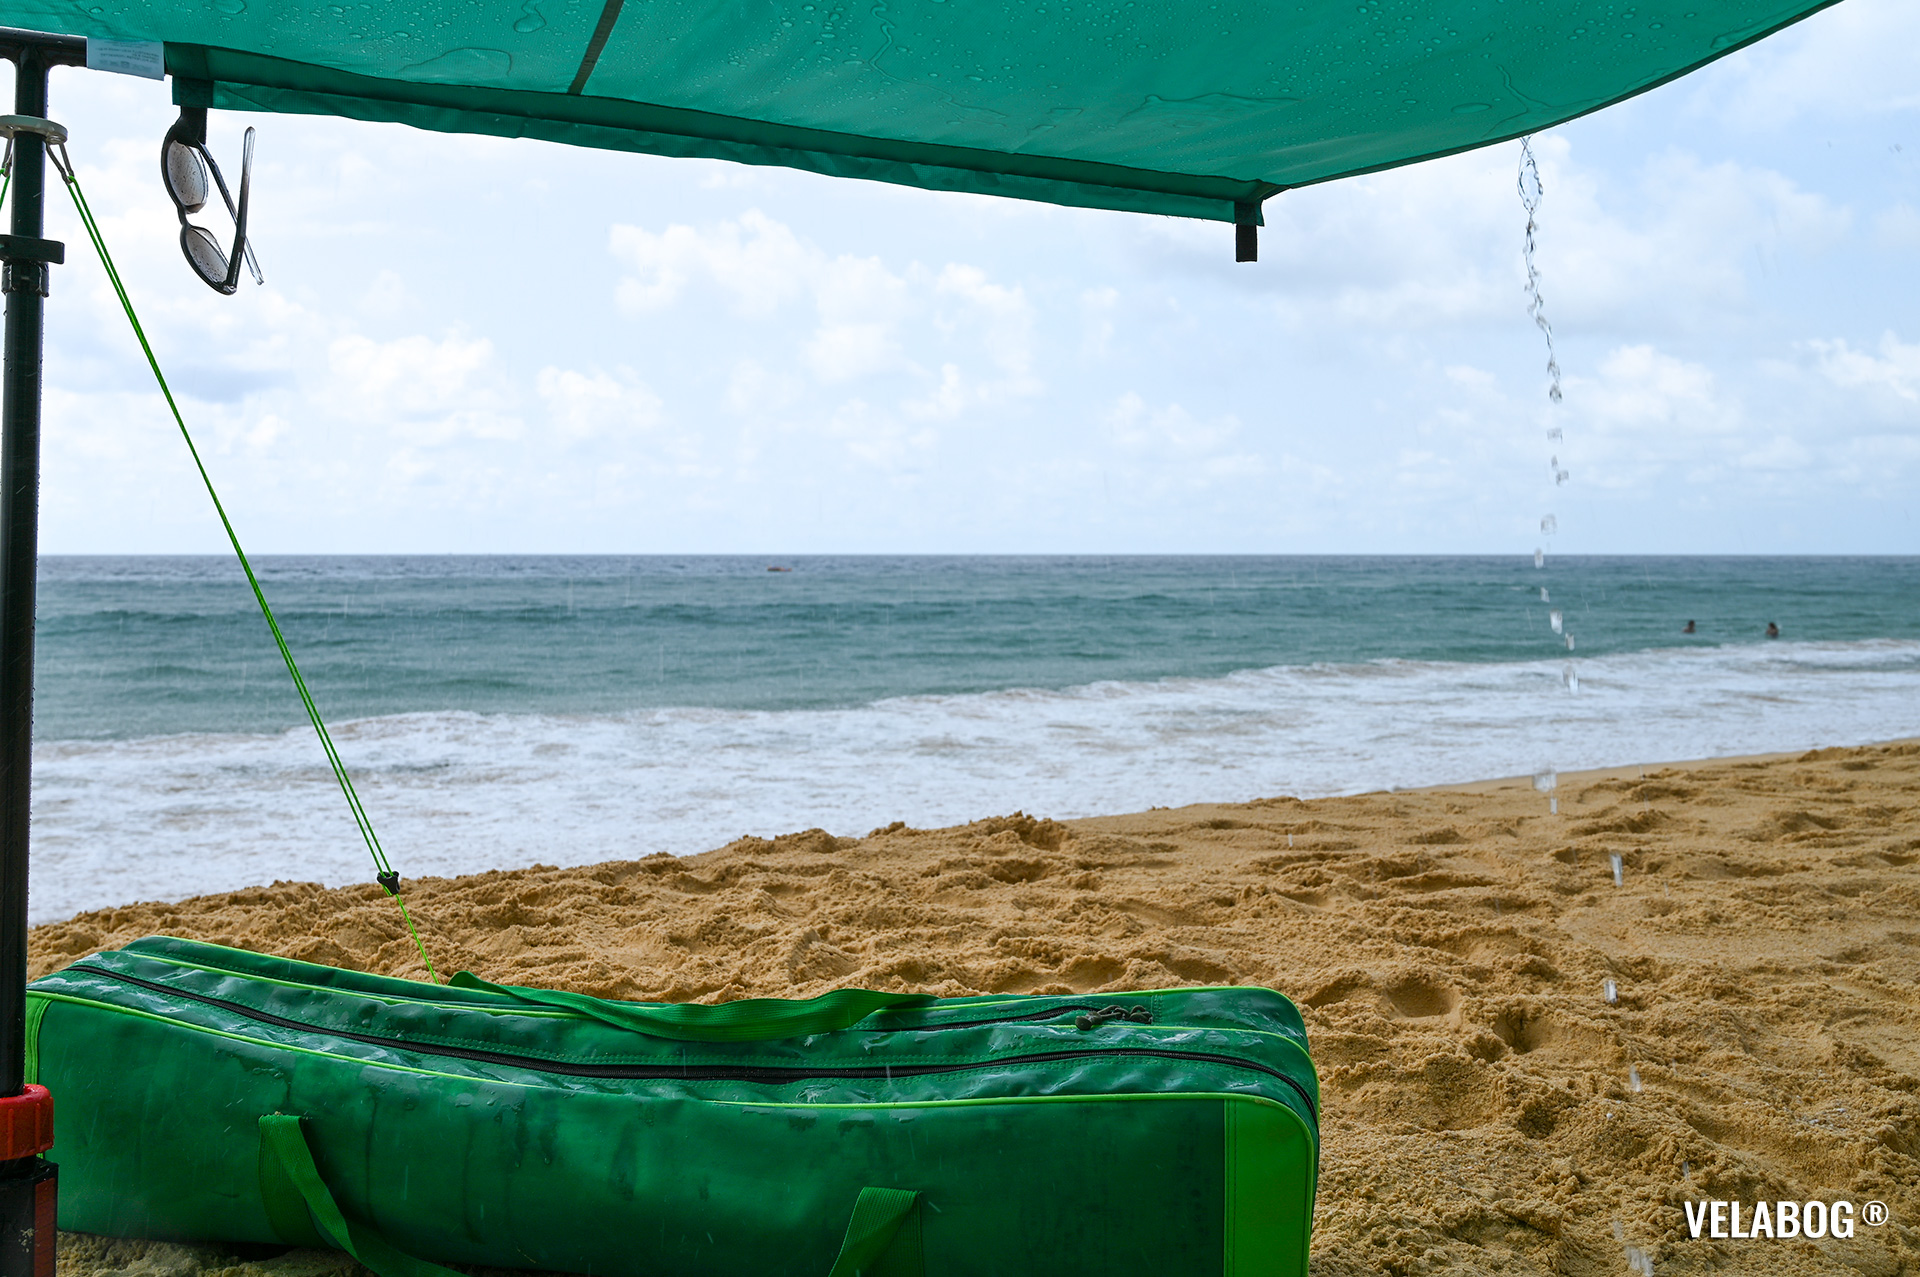 Beach sun sail Velabog Breeze, green, during tropical rain on the beach in Thailand. Best rain and sun shelter on the beach, best beach canopy tent. Setup option for no, light or gusty wind. Bottom view. Details.